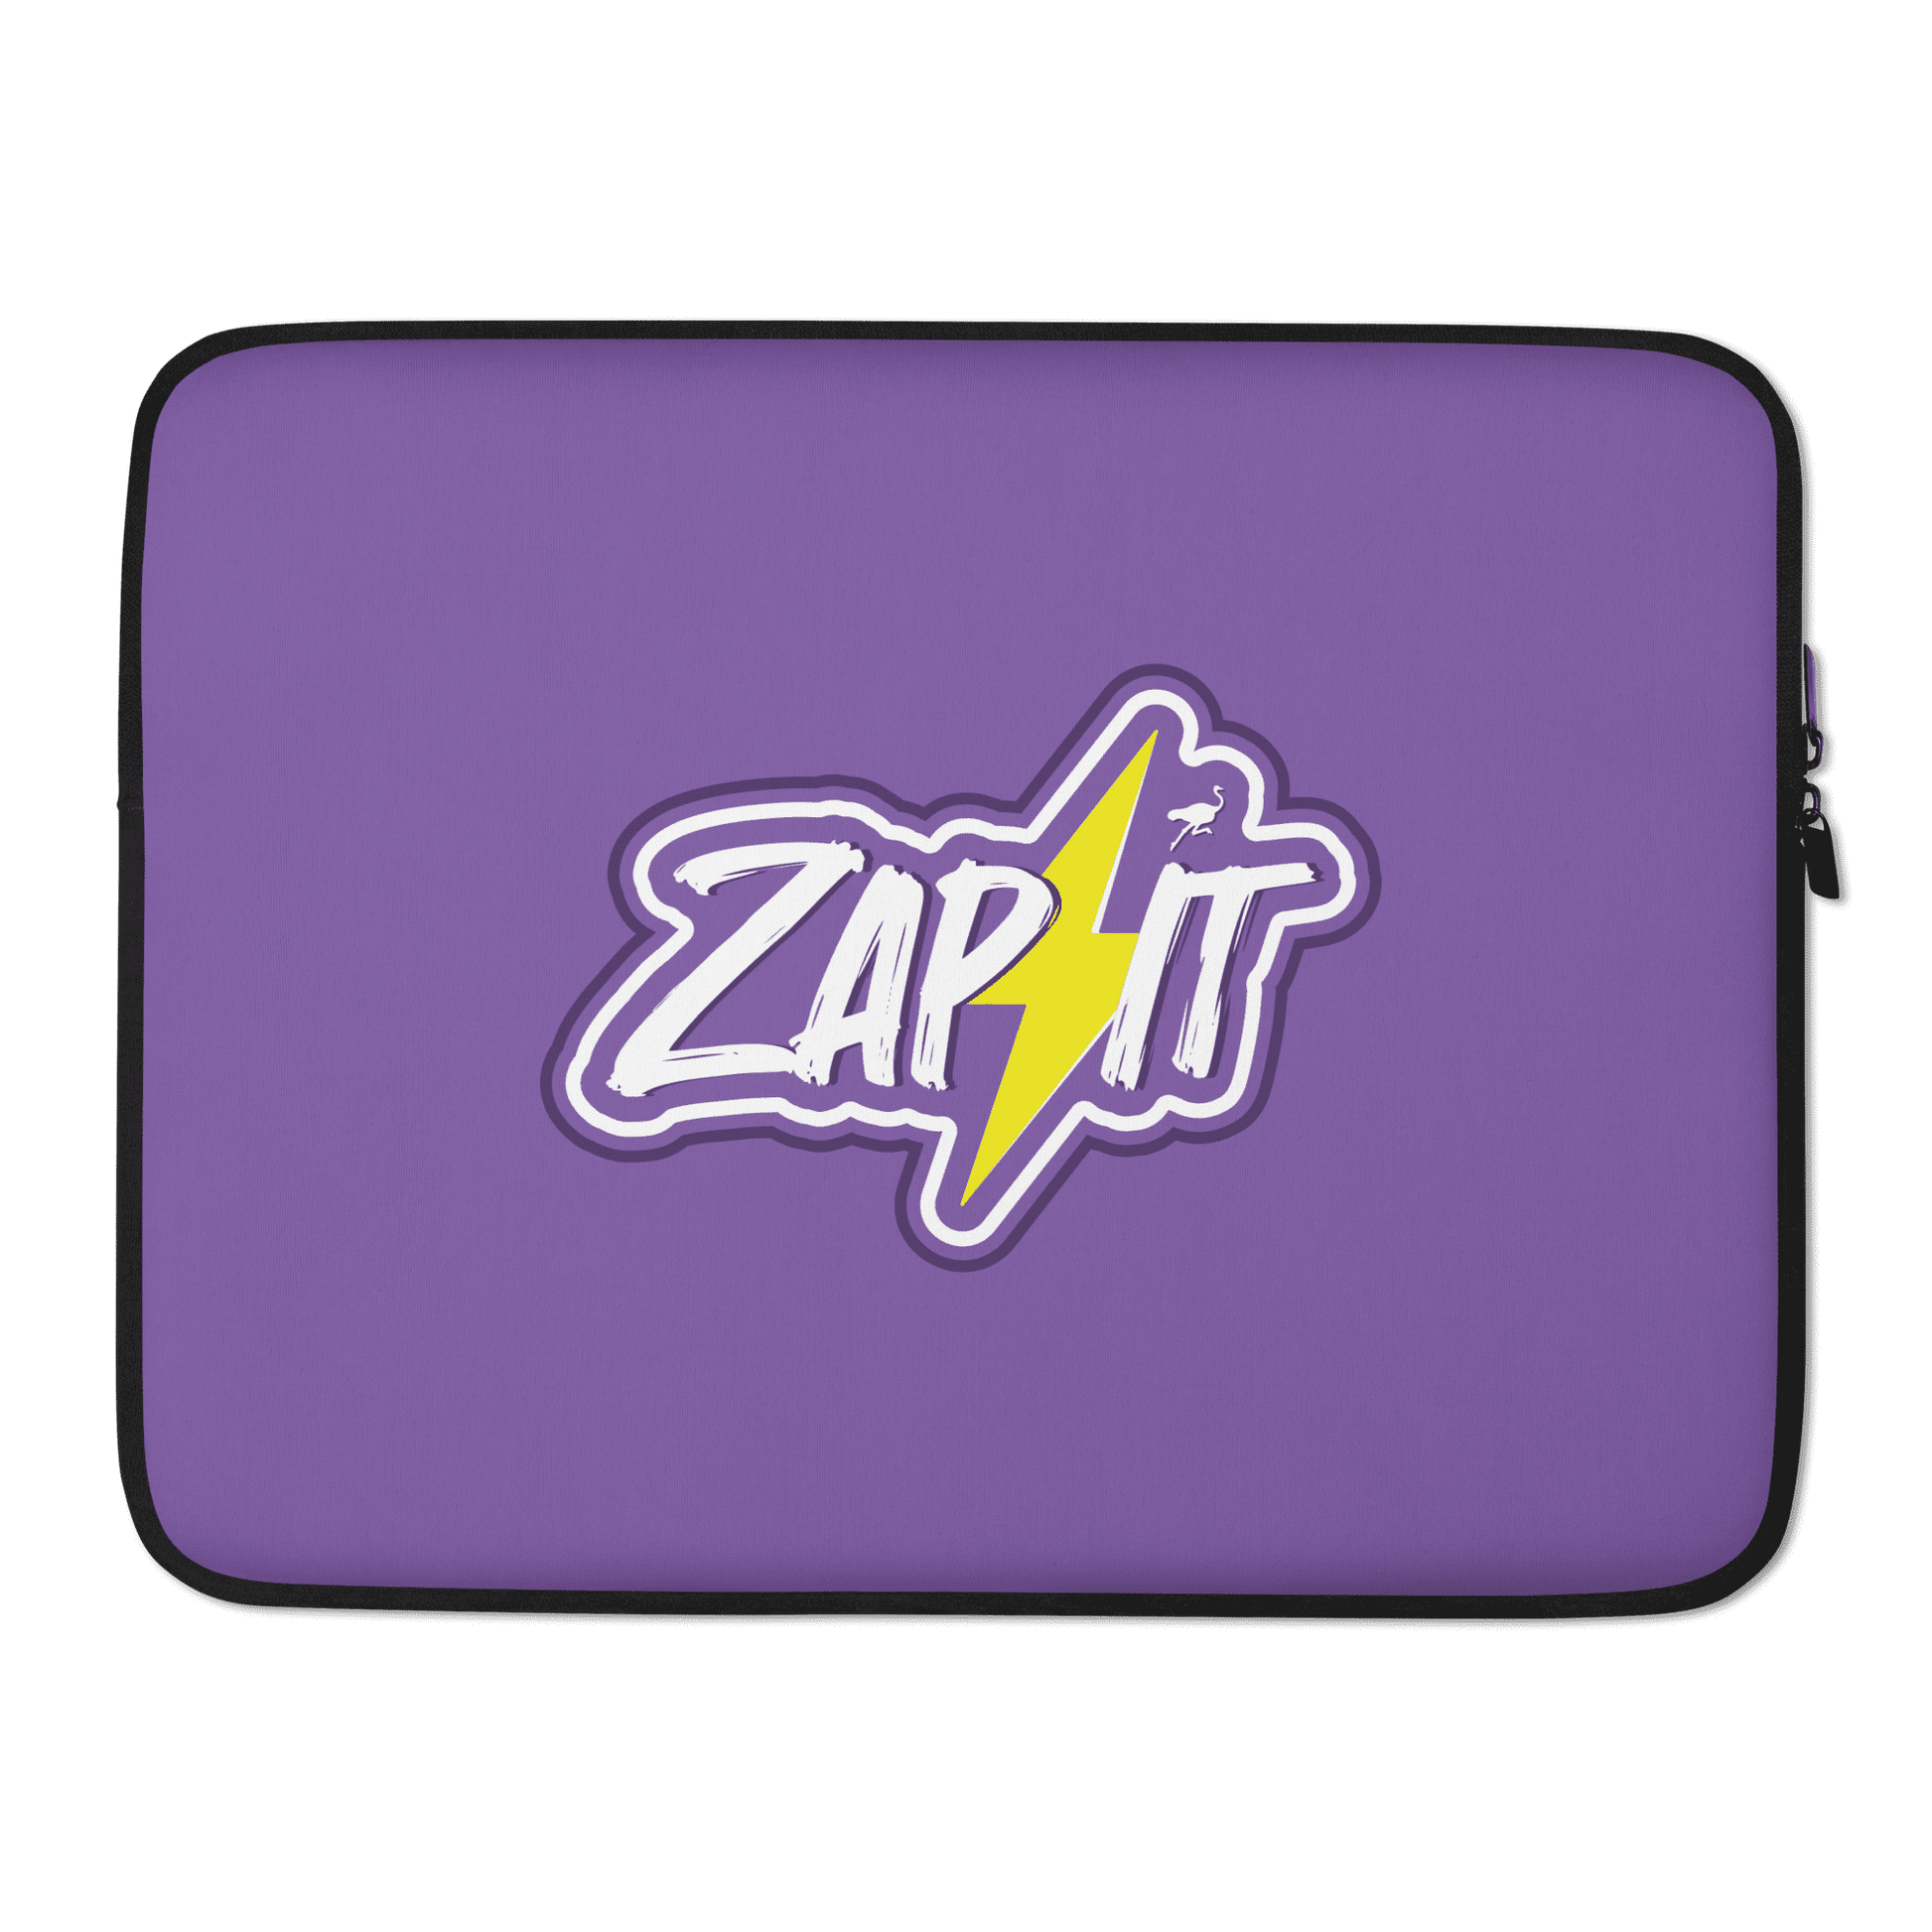 Front view of a purple 15 inch nostr laptop sleeve.